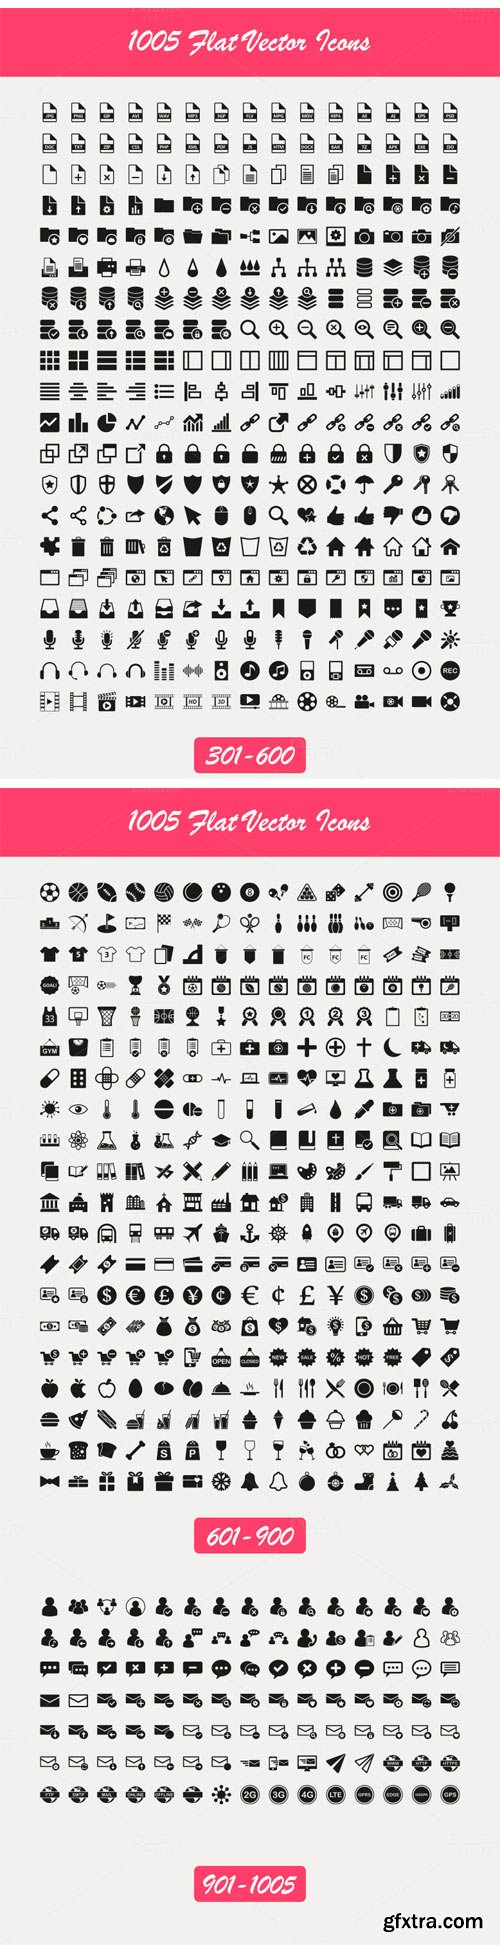 CM 230294 - 1005 Vector Icons Pack